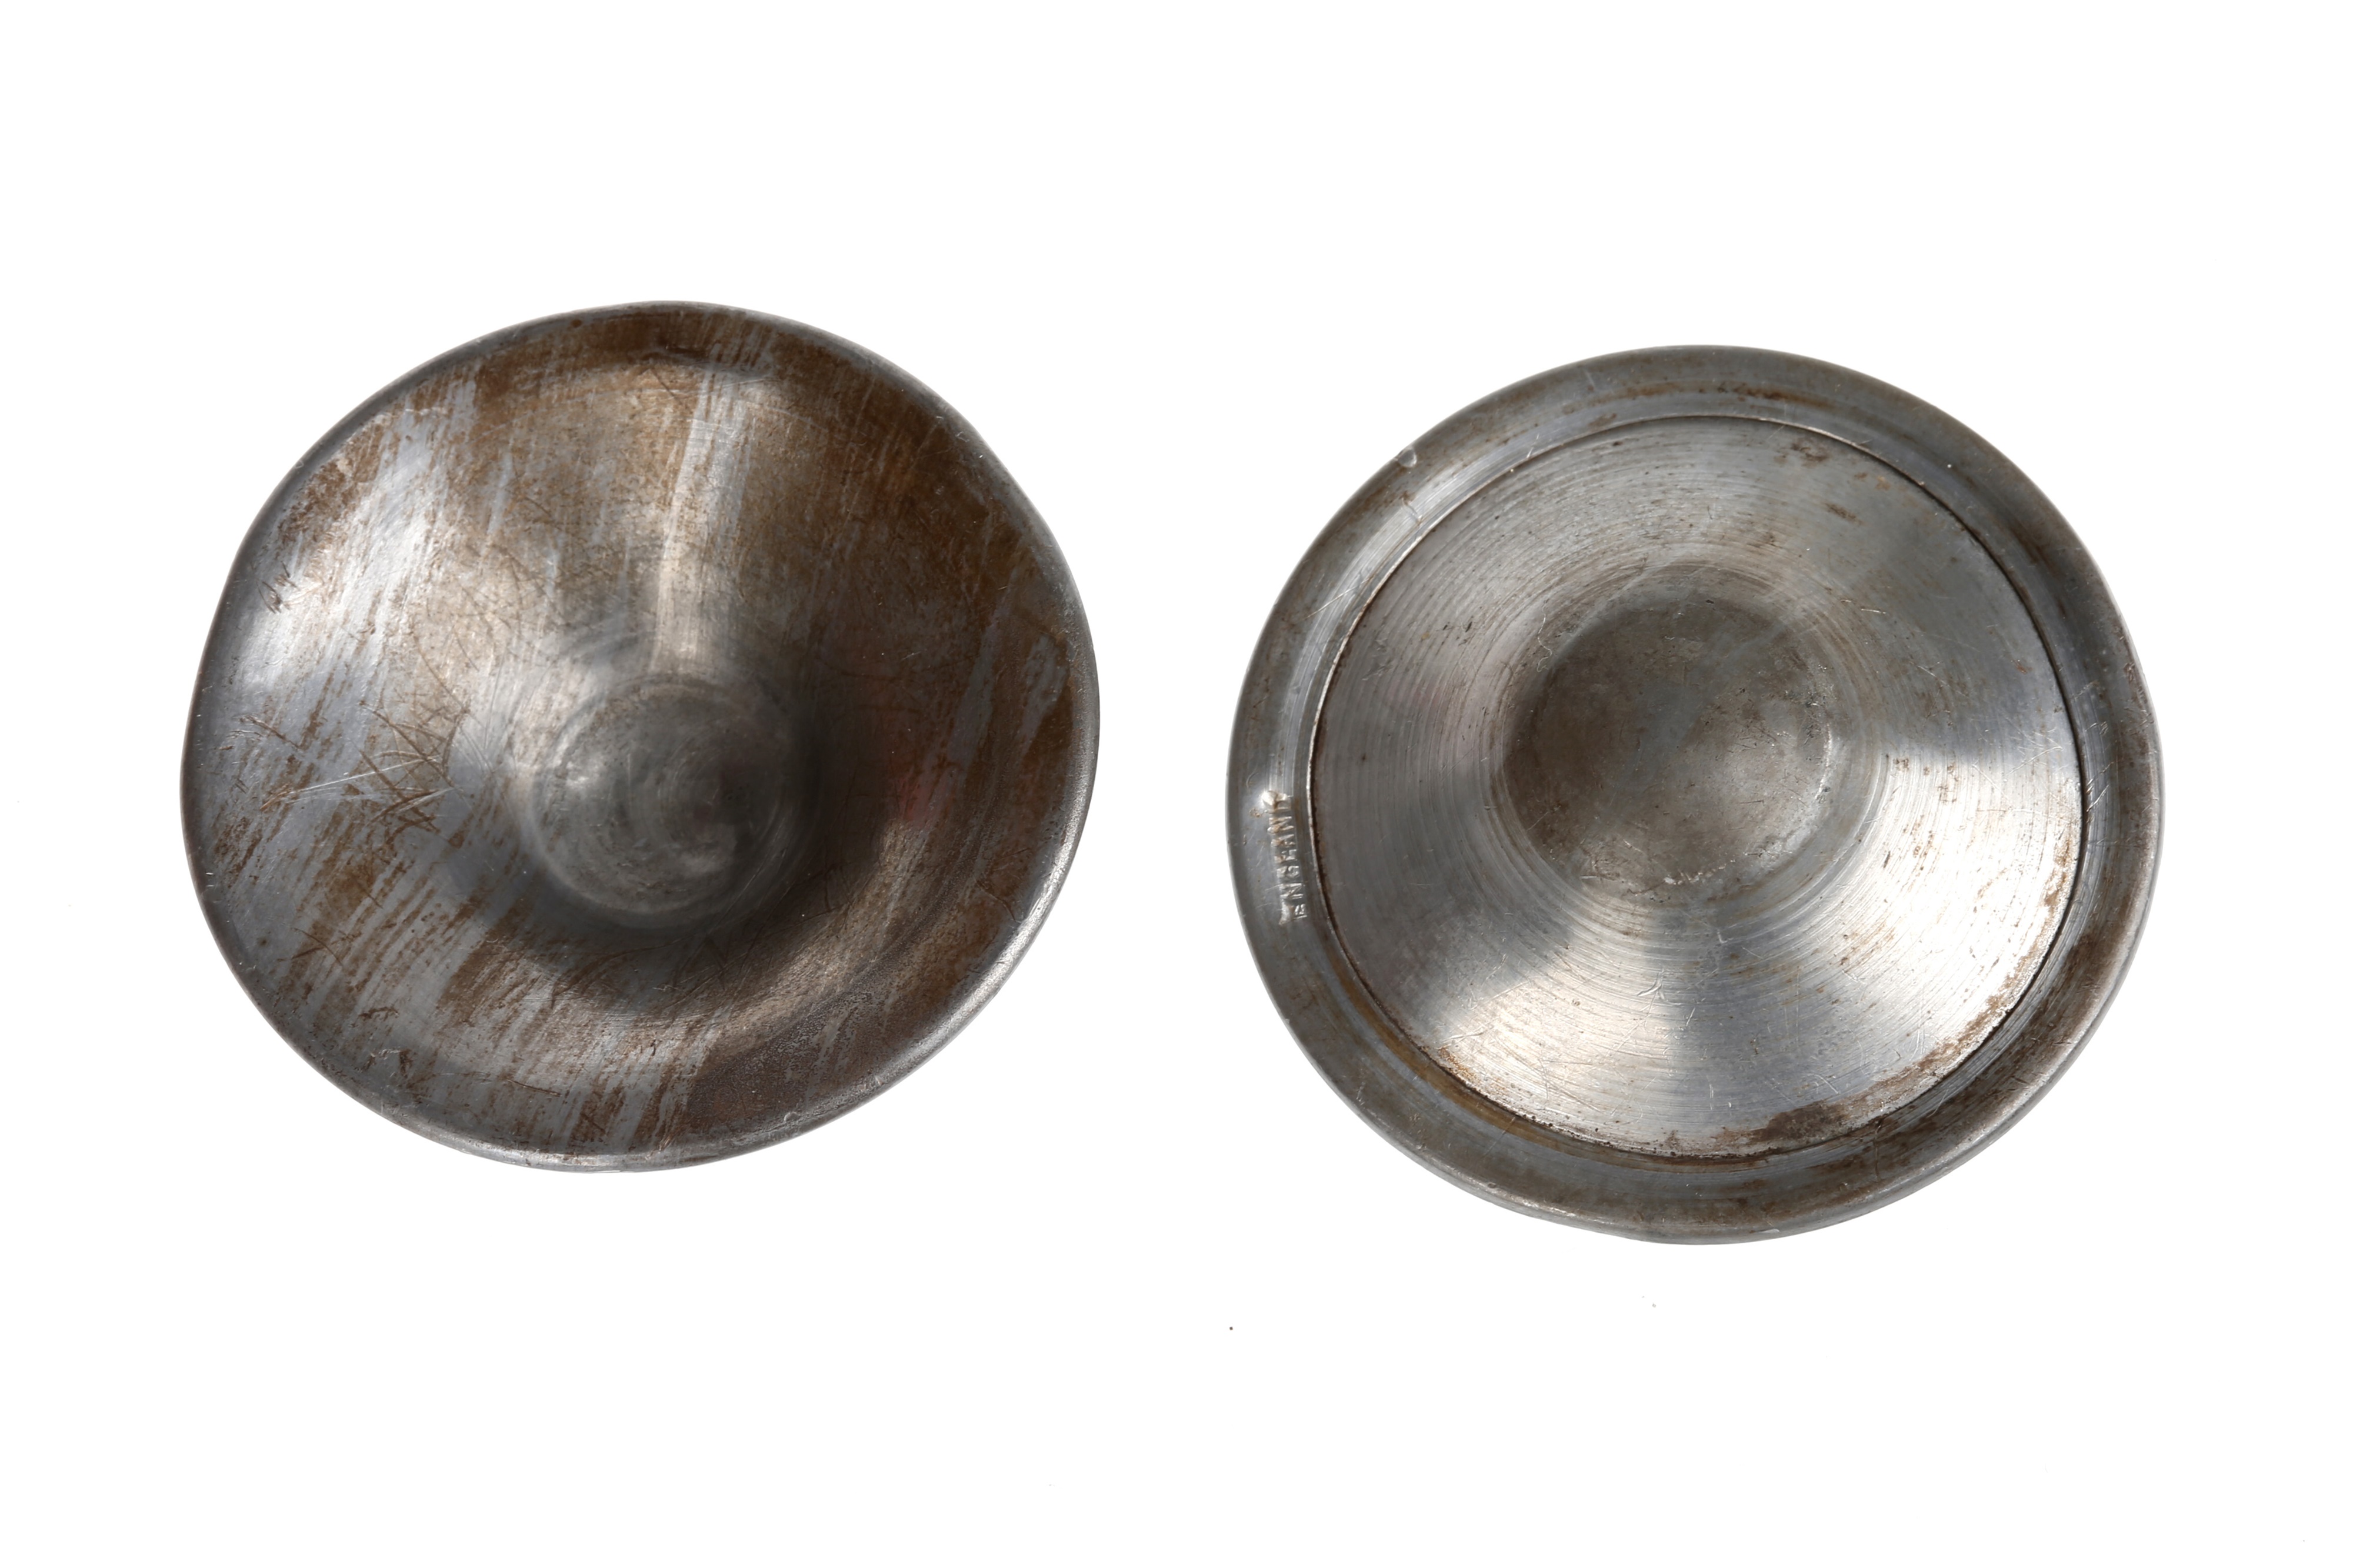 Dr. Wansbrough's Nipple Shields — The Tizzano Museum